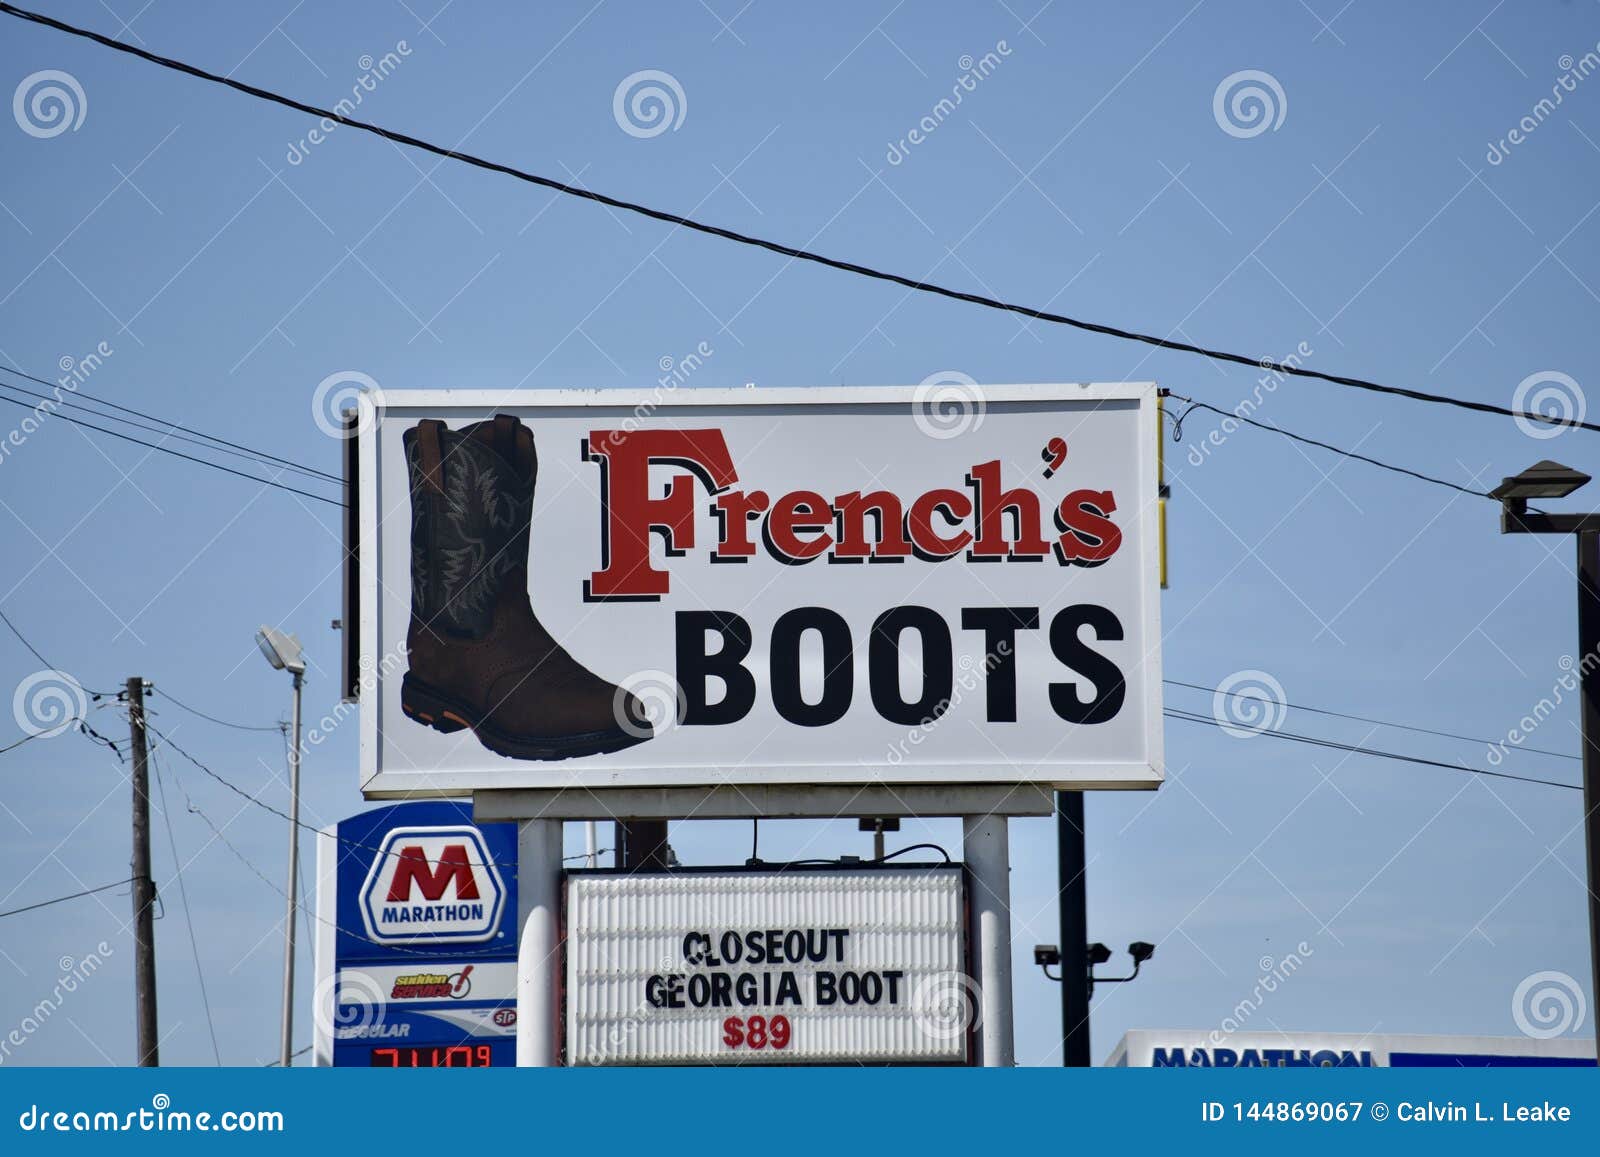 best website for boots